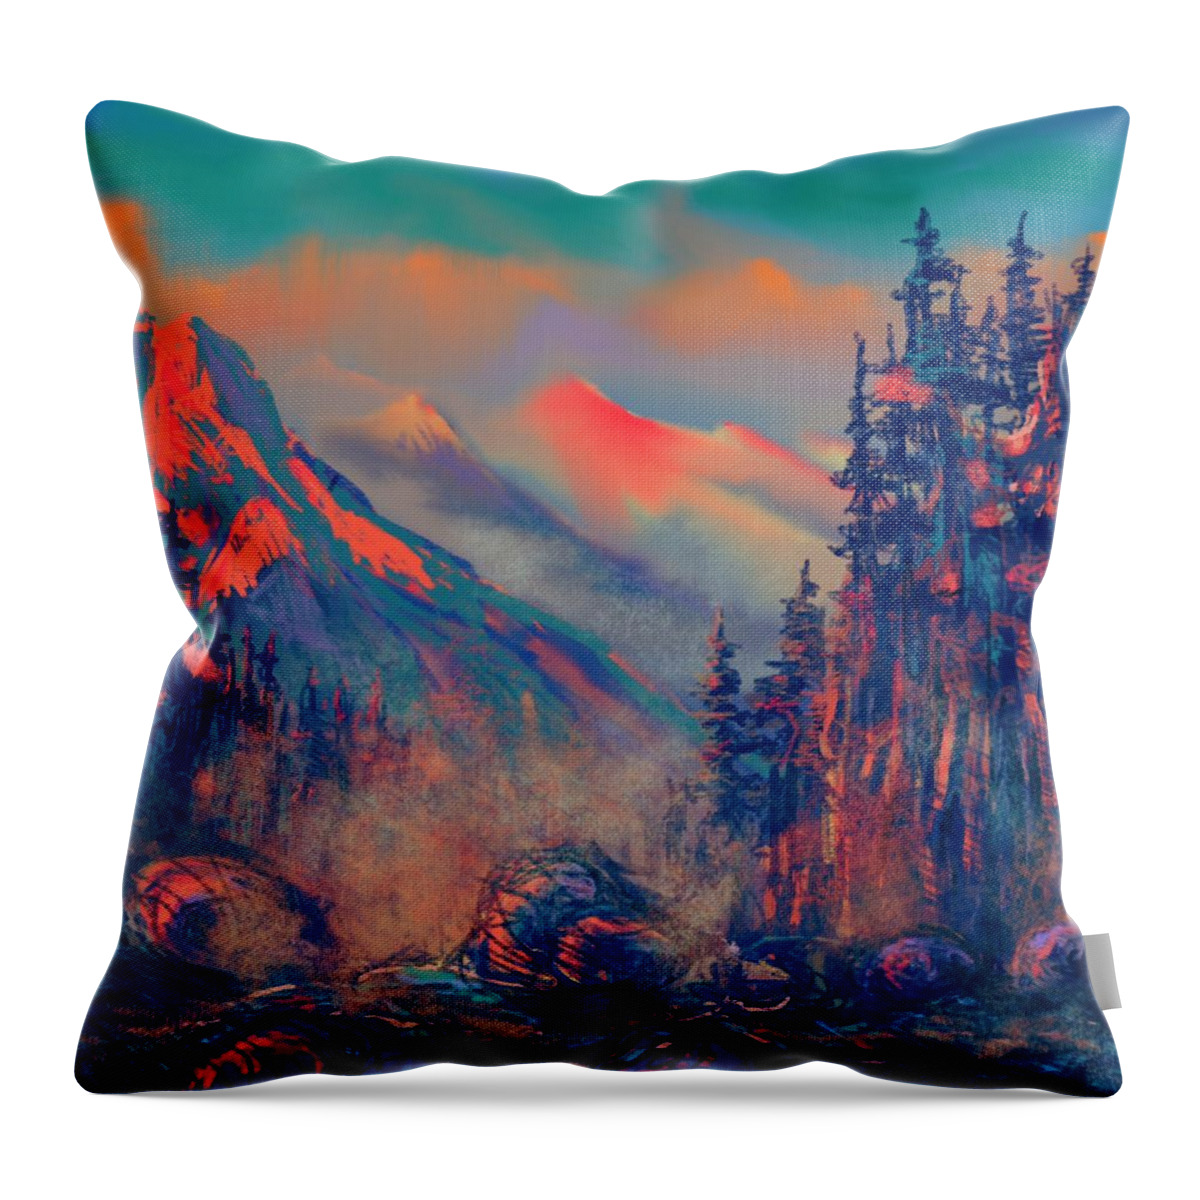 Mountains Throw Pillow featuring the painting Blue Silence by Vit Nasonov